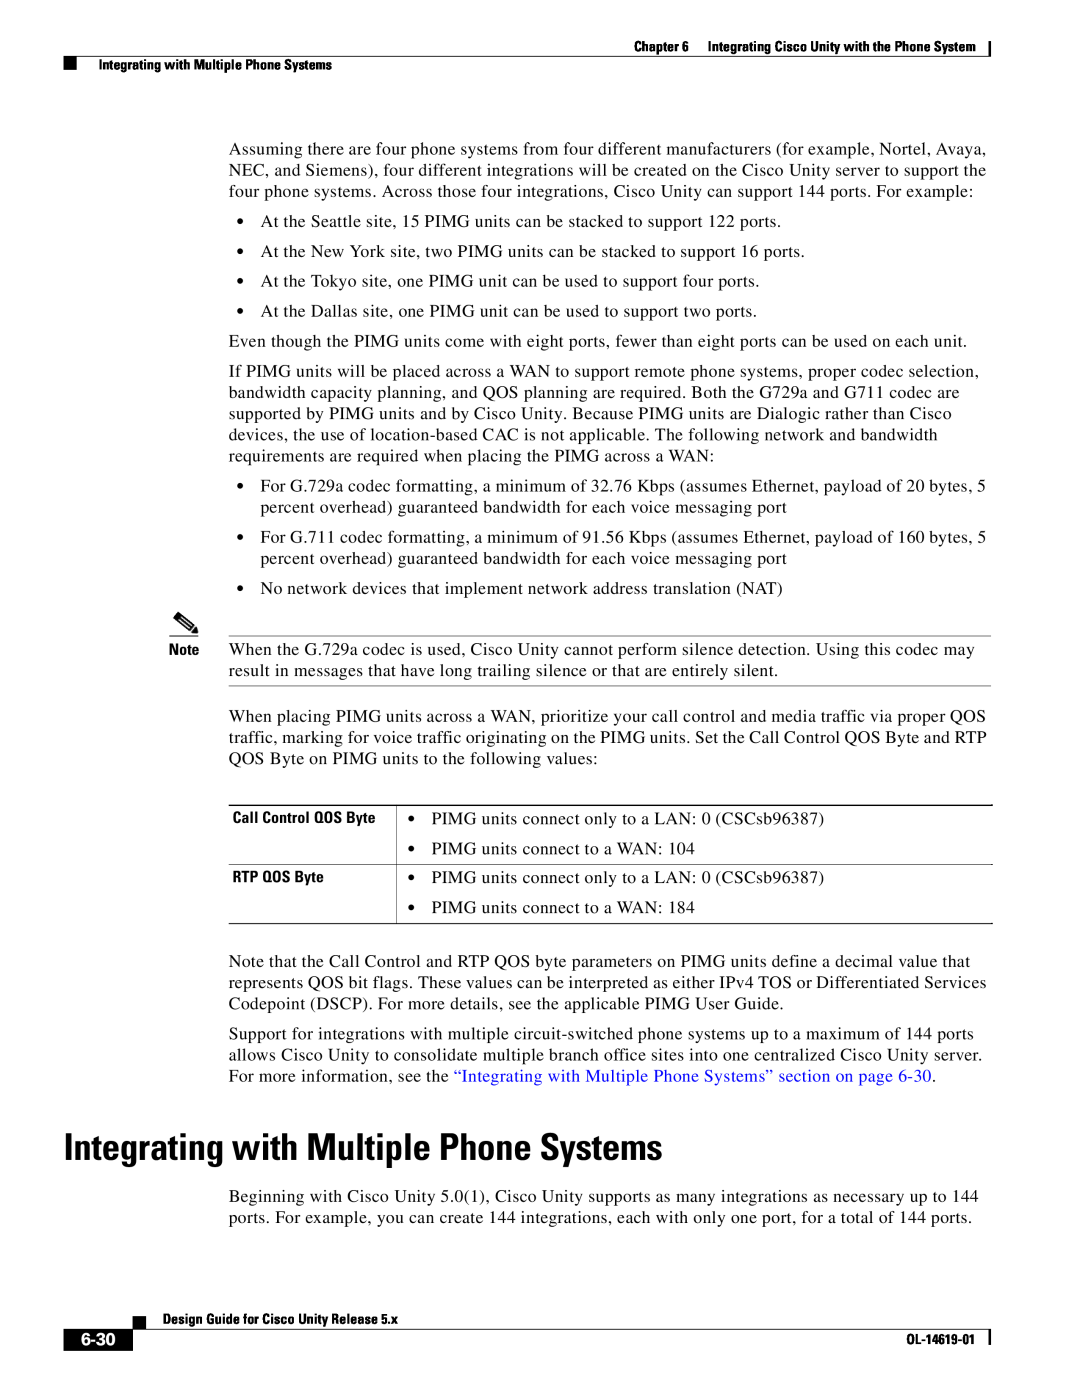 Cisco Systems OL-14619-01 manual Integrating with Multiple Phone Systems, 6-30, Call Control QOS Byte, RTP QOS Byte 